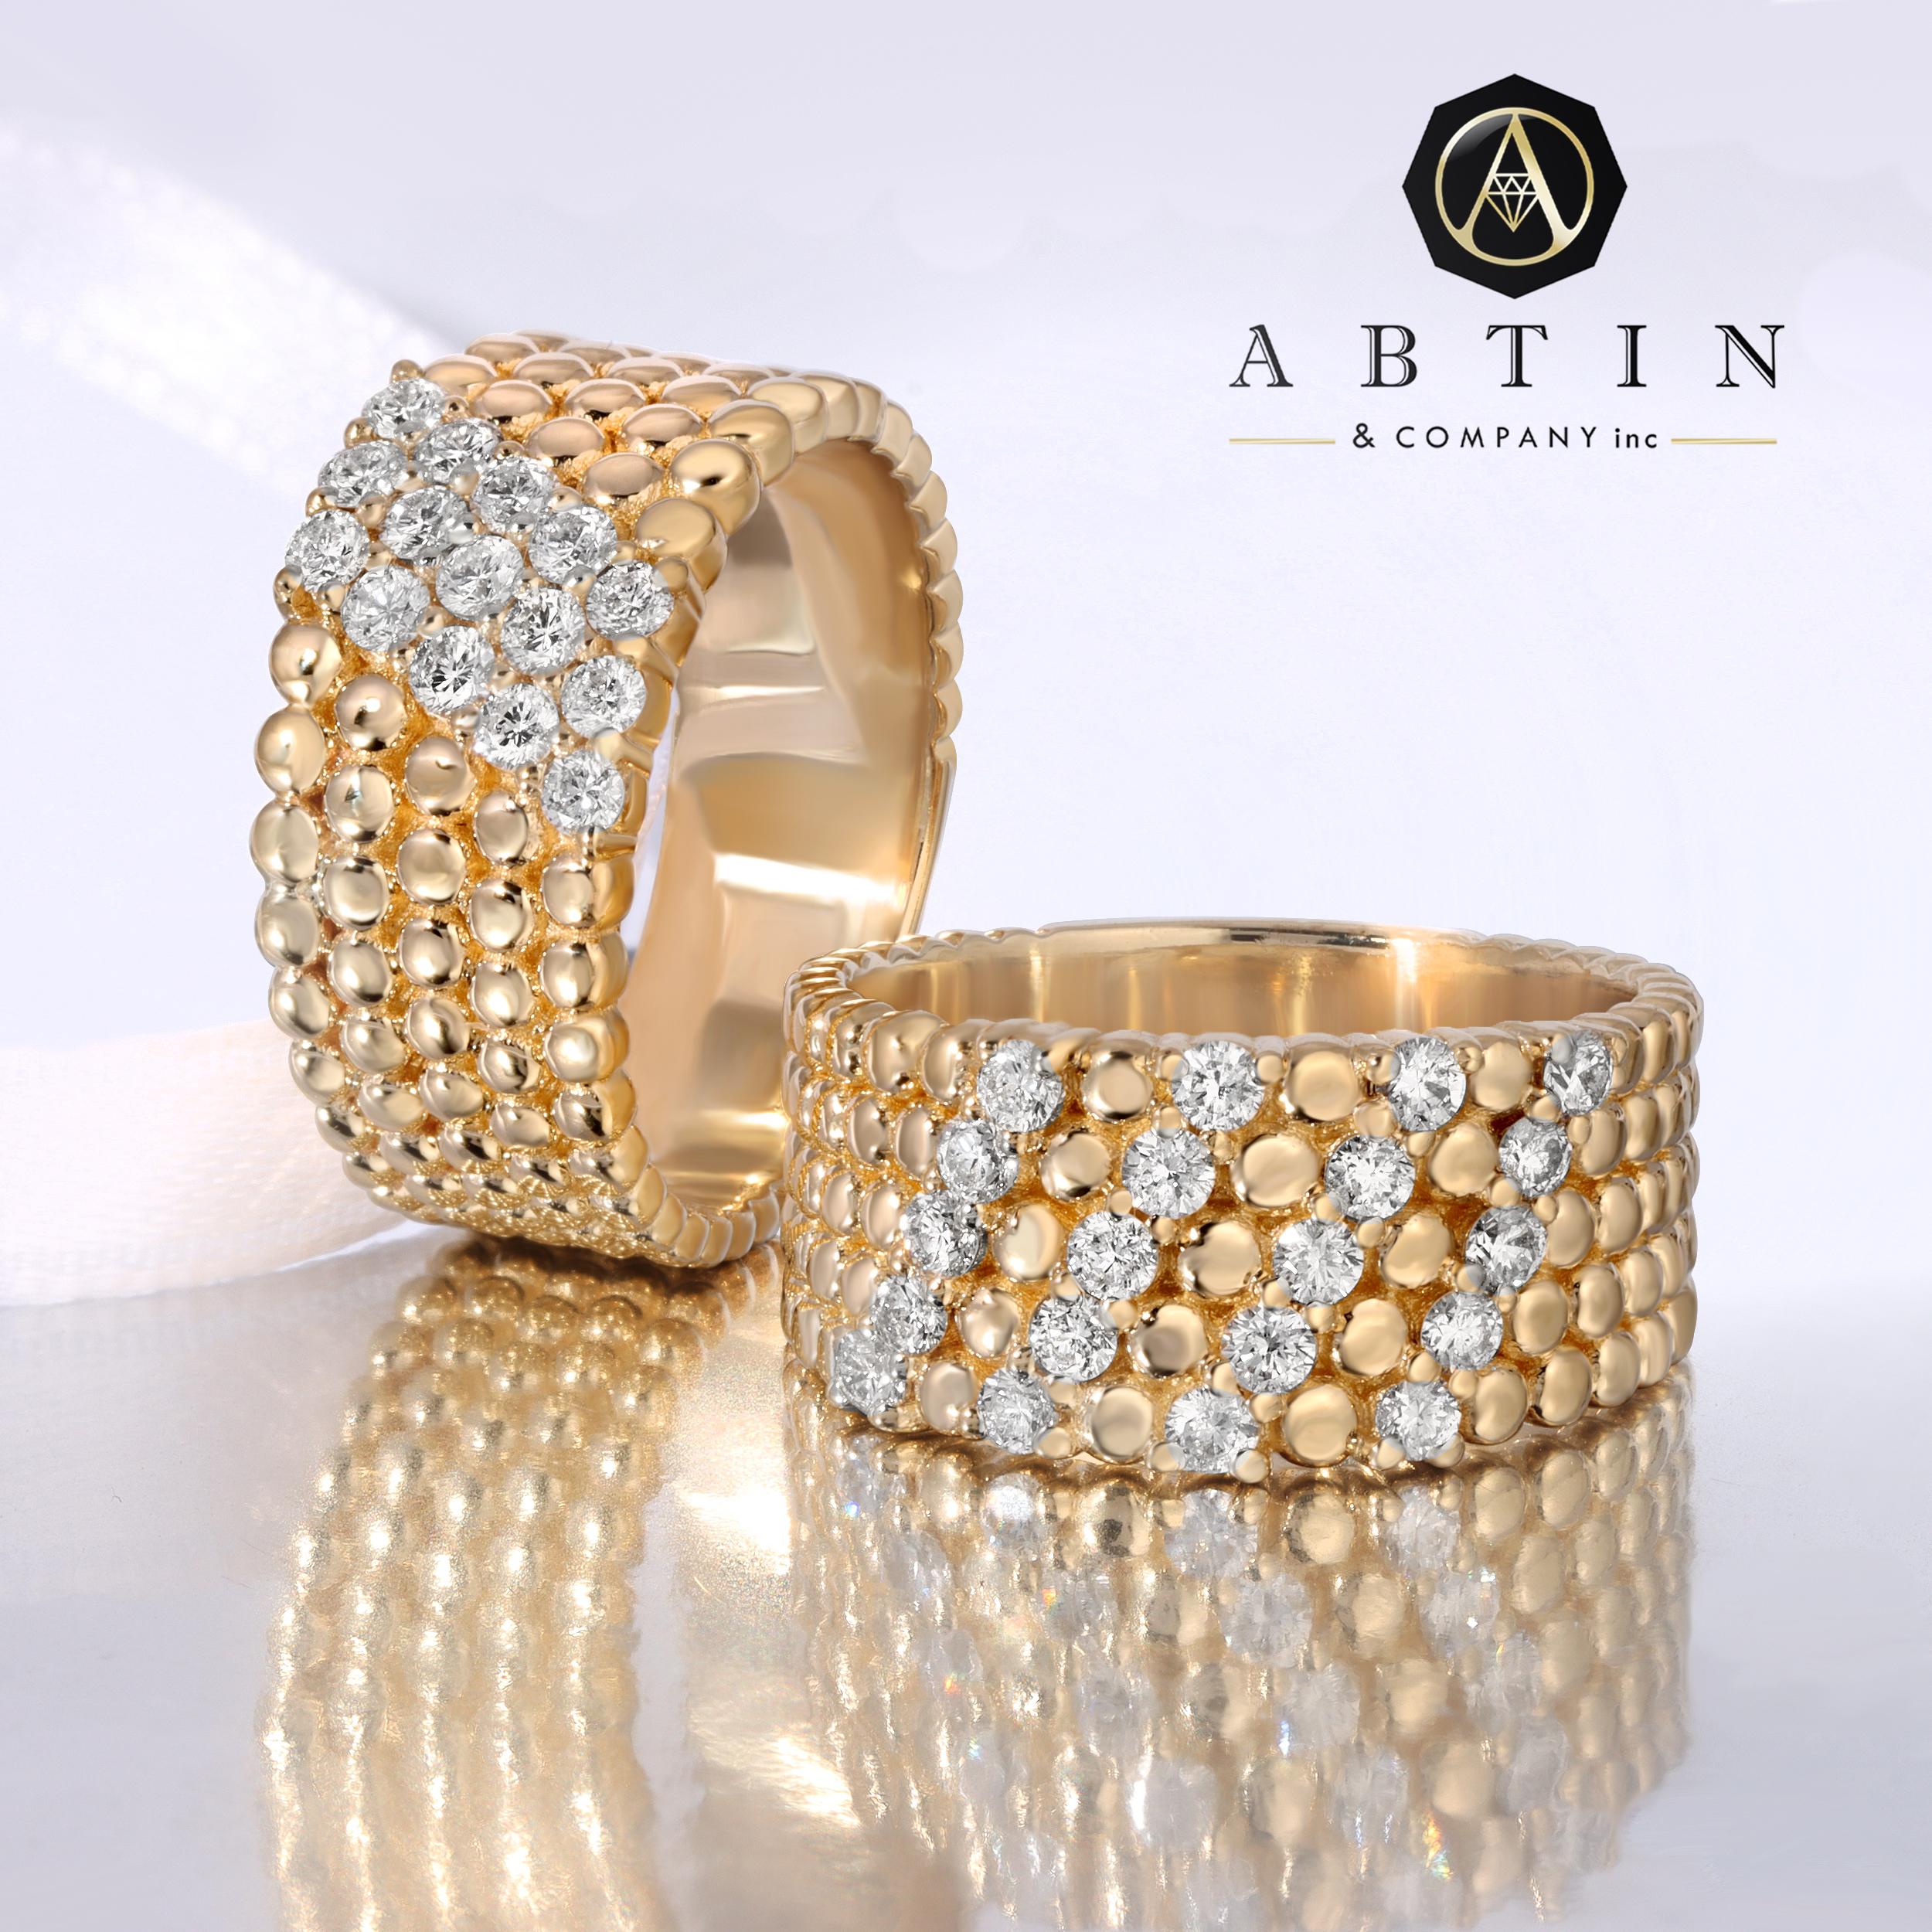 Made from 14k gold, this contemporary yellow gold ring with beaded detailing and diamonds is an ideal choice for daily wear. The three rows of round prong-set diamonds embedded in the beaded bands add a touch of sophistication to this everyday